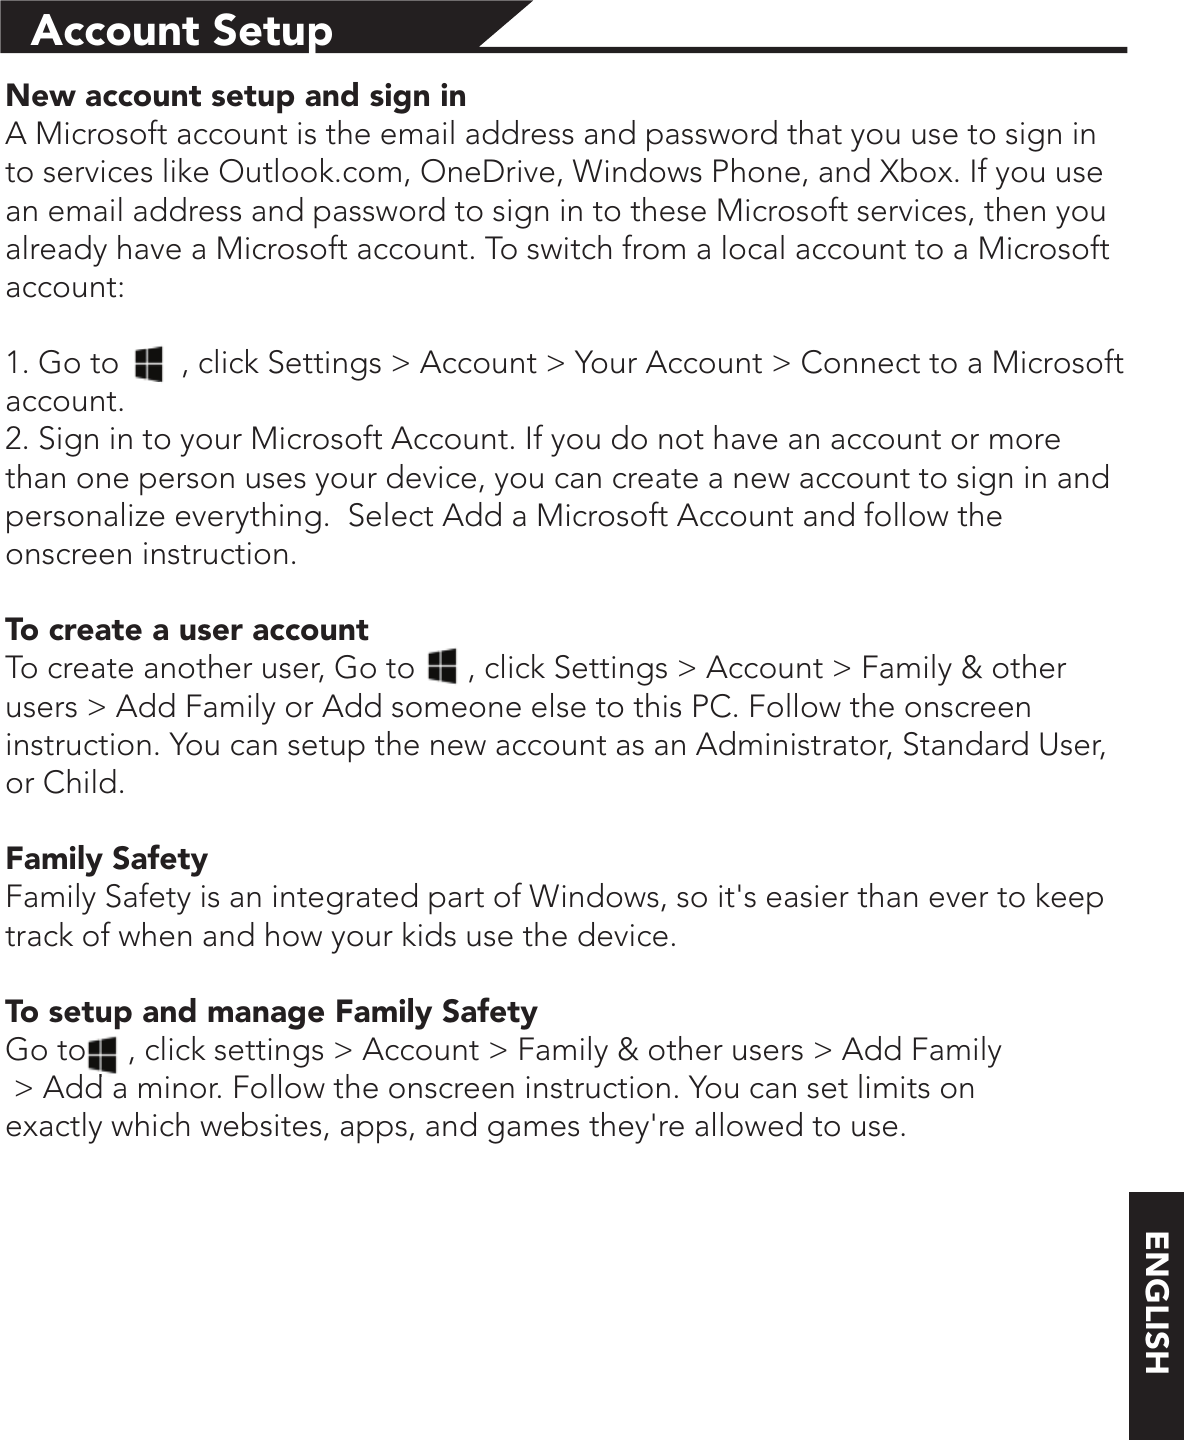 ENGLISHAccount SetupNew account setup and sign inA Microsoft account is the email address and password that you use to sign in to services like Outlook.com, OneDrive, Windows Phone, and Xbox. If you use an email address and password to sign in to these Microsoft services, then you already have a Microsoft account. To switch from a local account to a Microsoft account:1. Go to      , click Settings &gt; Account &gt; Your Account &gt; Connect to a Microsoft account.2. Sign in to your Microsoft Account. If you do not have an account or more than one person uses your device, you can create a new account to sign in and personalize everything.  Select Add a Microsoft Account and follow the onscreen instruction.To create a user accountTo create another user, Go to      , click Settings &gt; Account &gt; Family &amp; other users &gt; Add Family or Add someone else to this PC. Follow the onscreen instruction. You can setup the new account as an Administrator, Standard User, or Child.Family SafetyFamily Safety is an integrated part of Windows, so it&apos;s easier than ever to keep track of when and how your kids use the device.To setup and manage Family SafetyGo to     , click settings &gt; Account &gt; Family &amp; other users &gt; Add Family &gt; Add a minor. Follow the onscreen instruction. You can set limits on exactly which websites, apps, and games they&apos;re allowed to use.